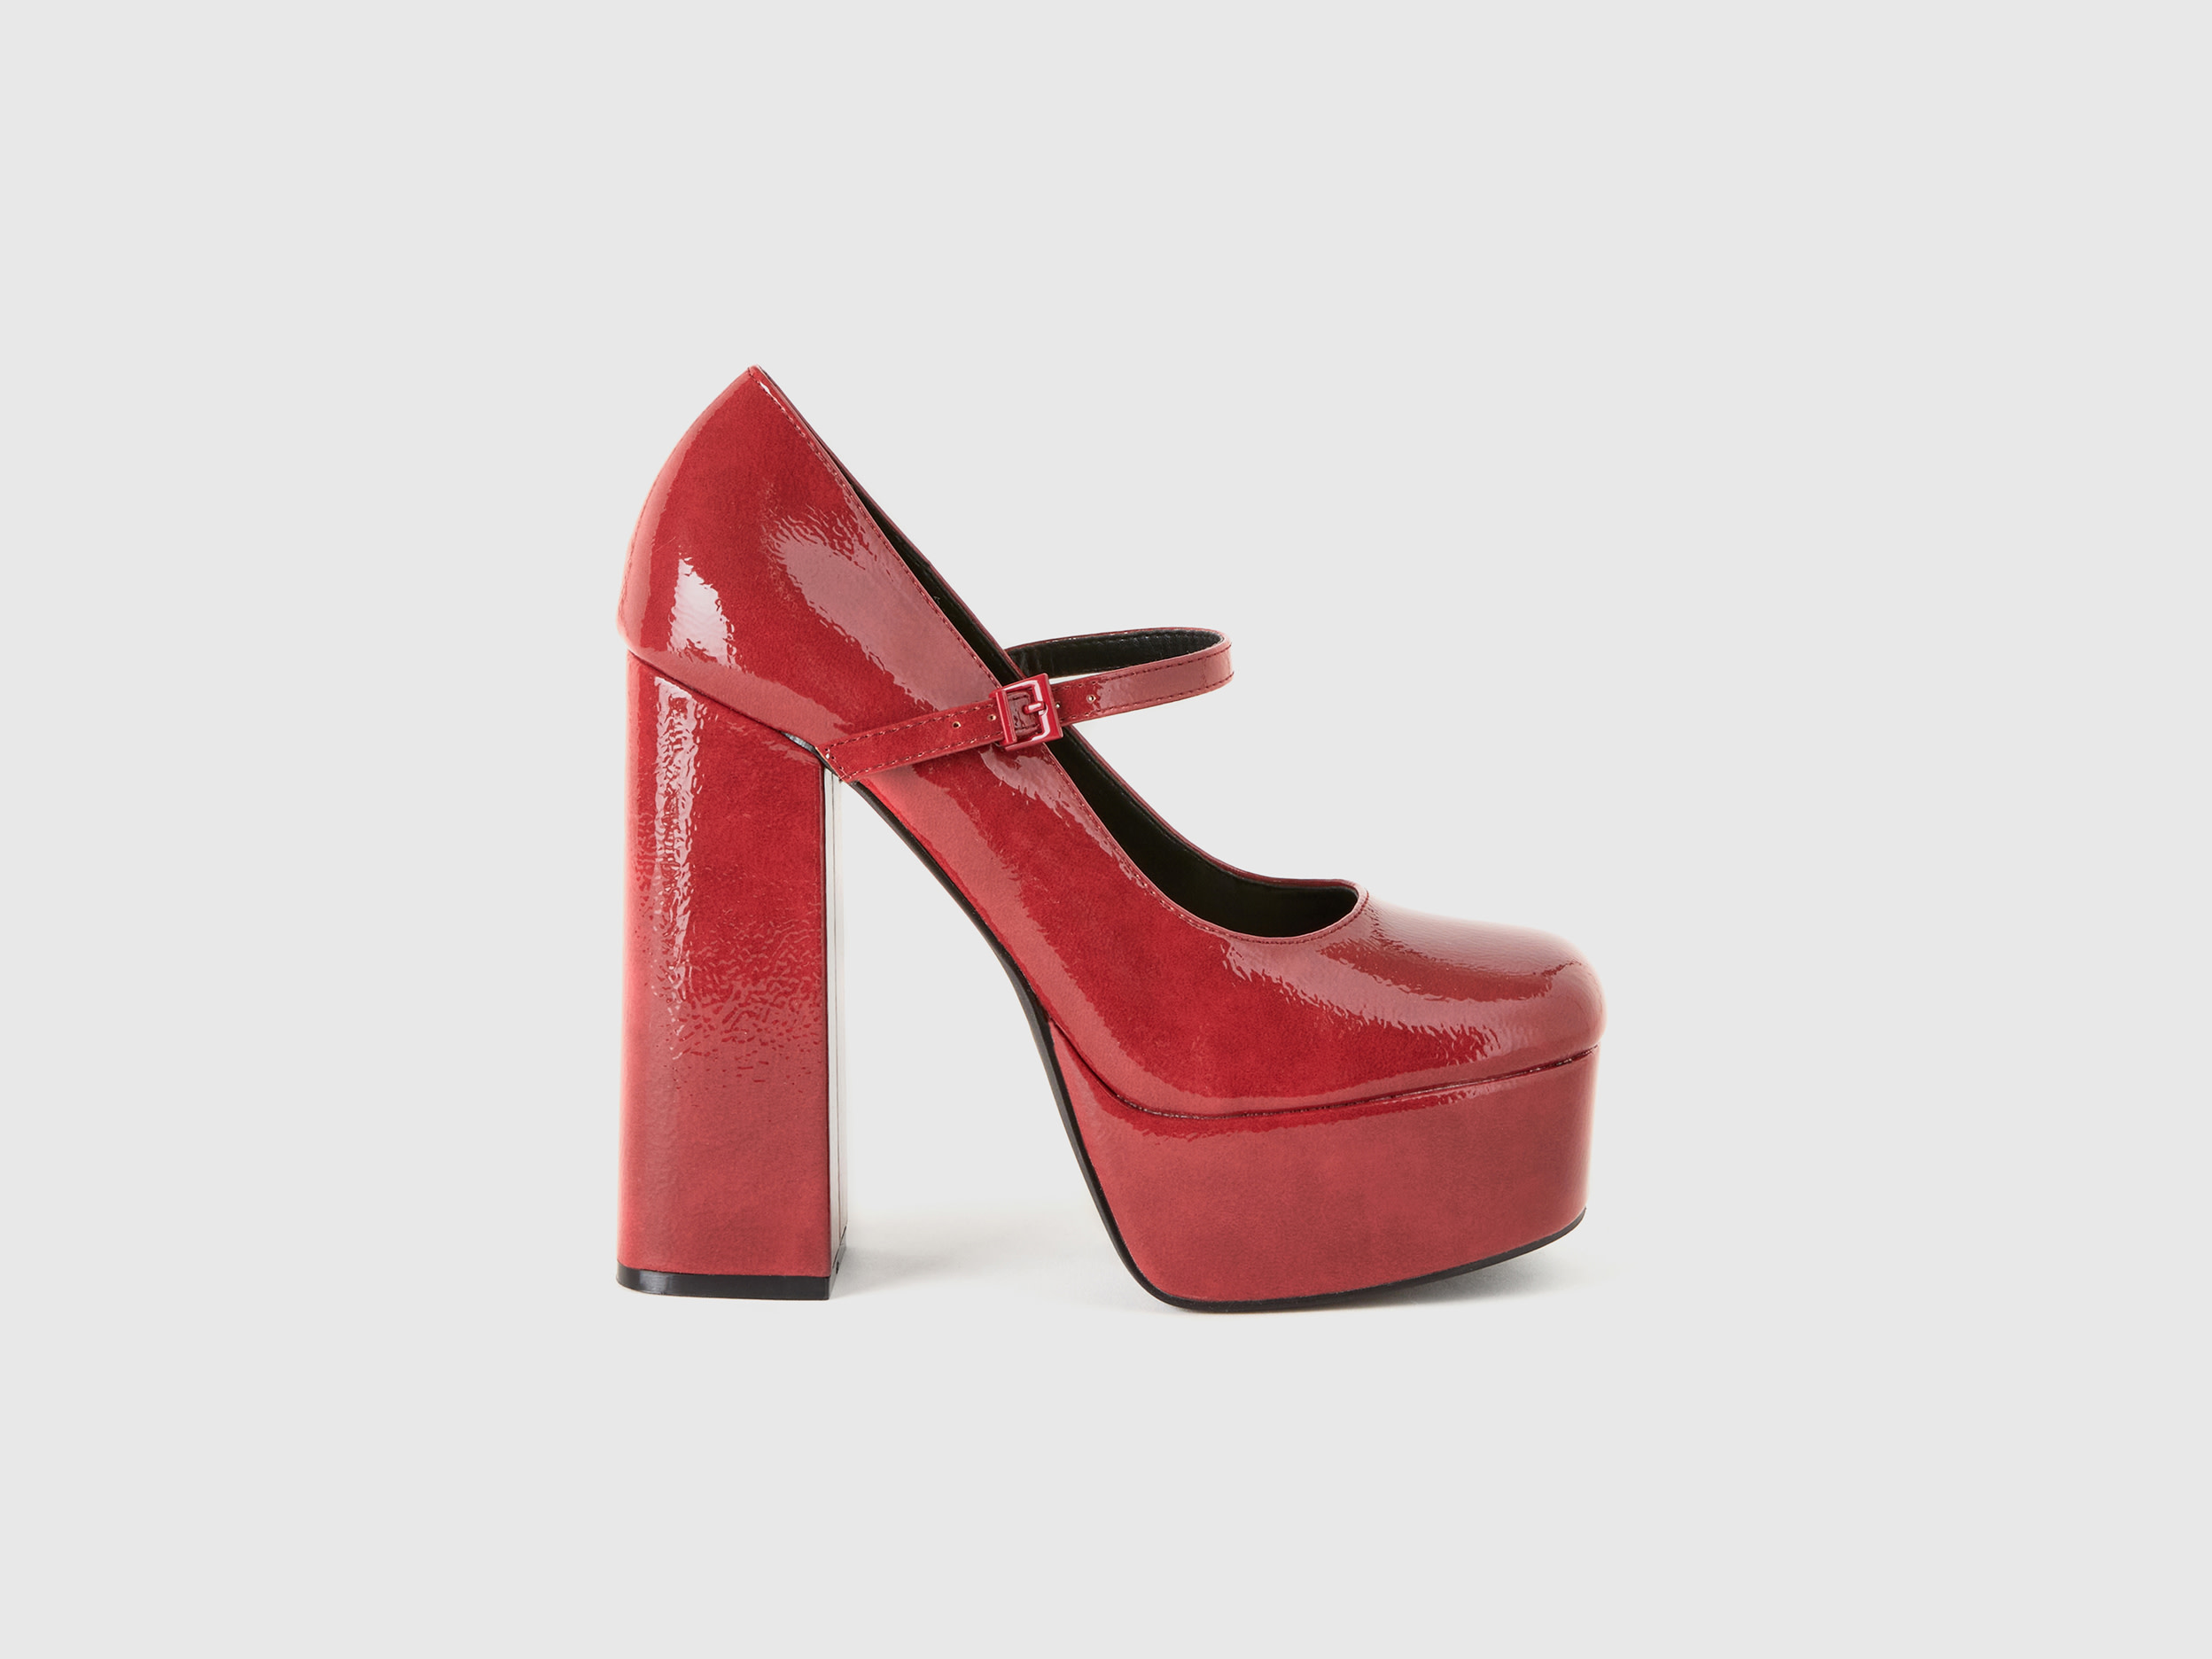 Benetton, Glossy Pumps With Heel And Buckle, size 6, Red, Women